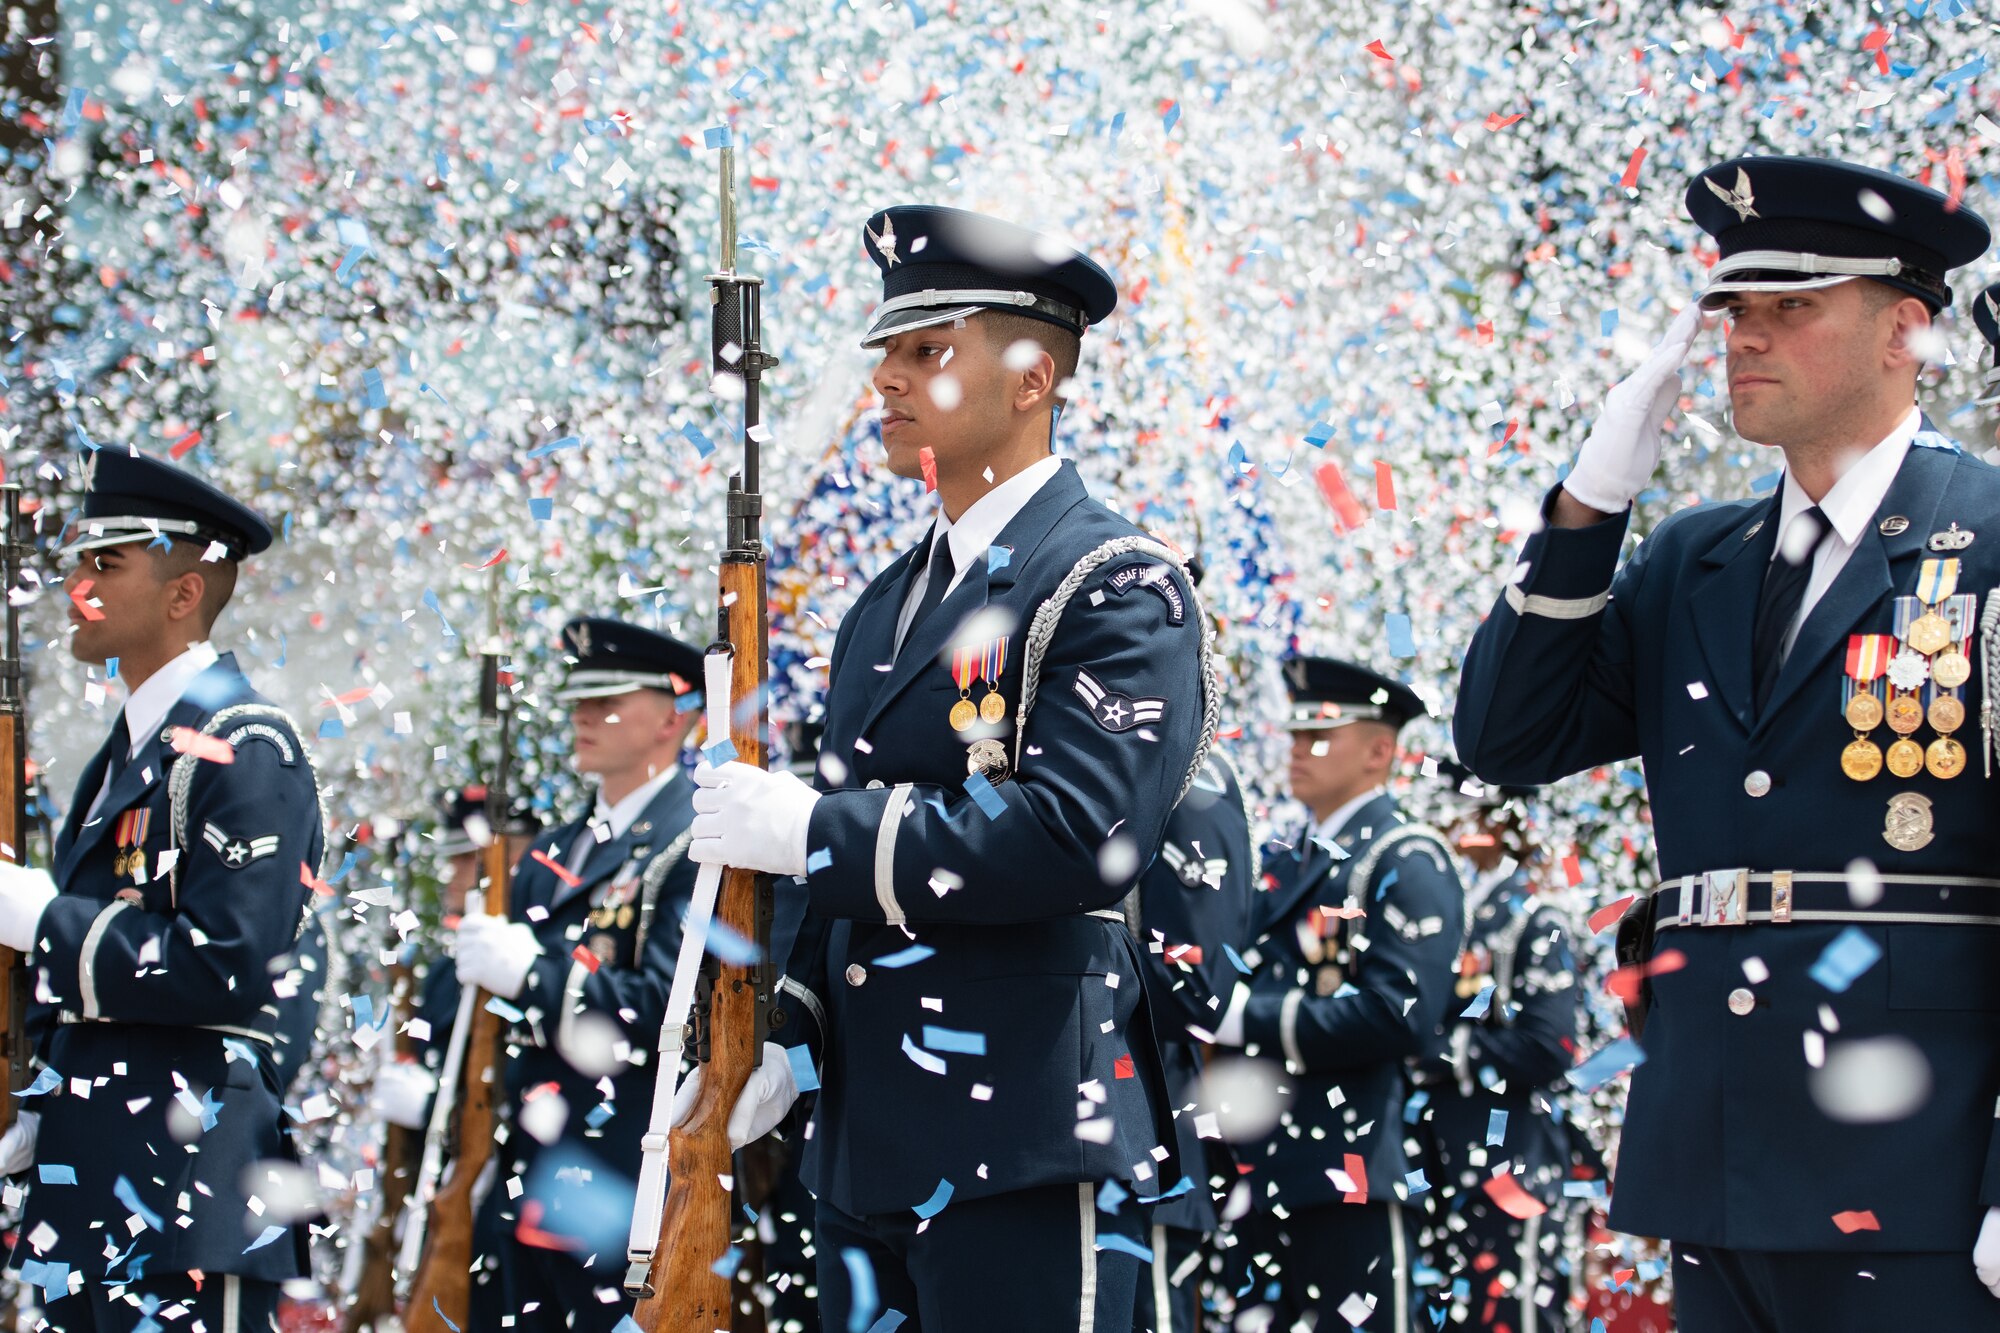 U.S. Air Force Honor Guard Drill Team during the playing of The Star-Spangled Banner